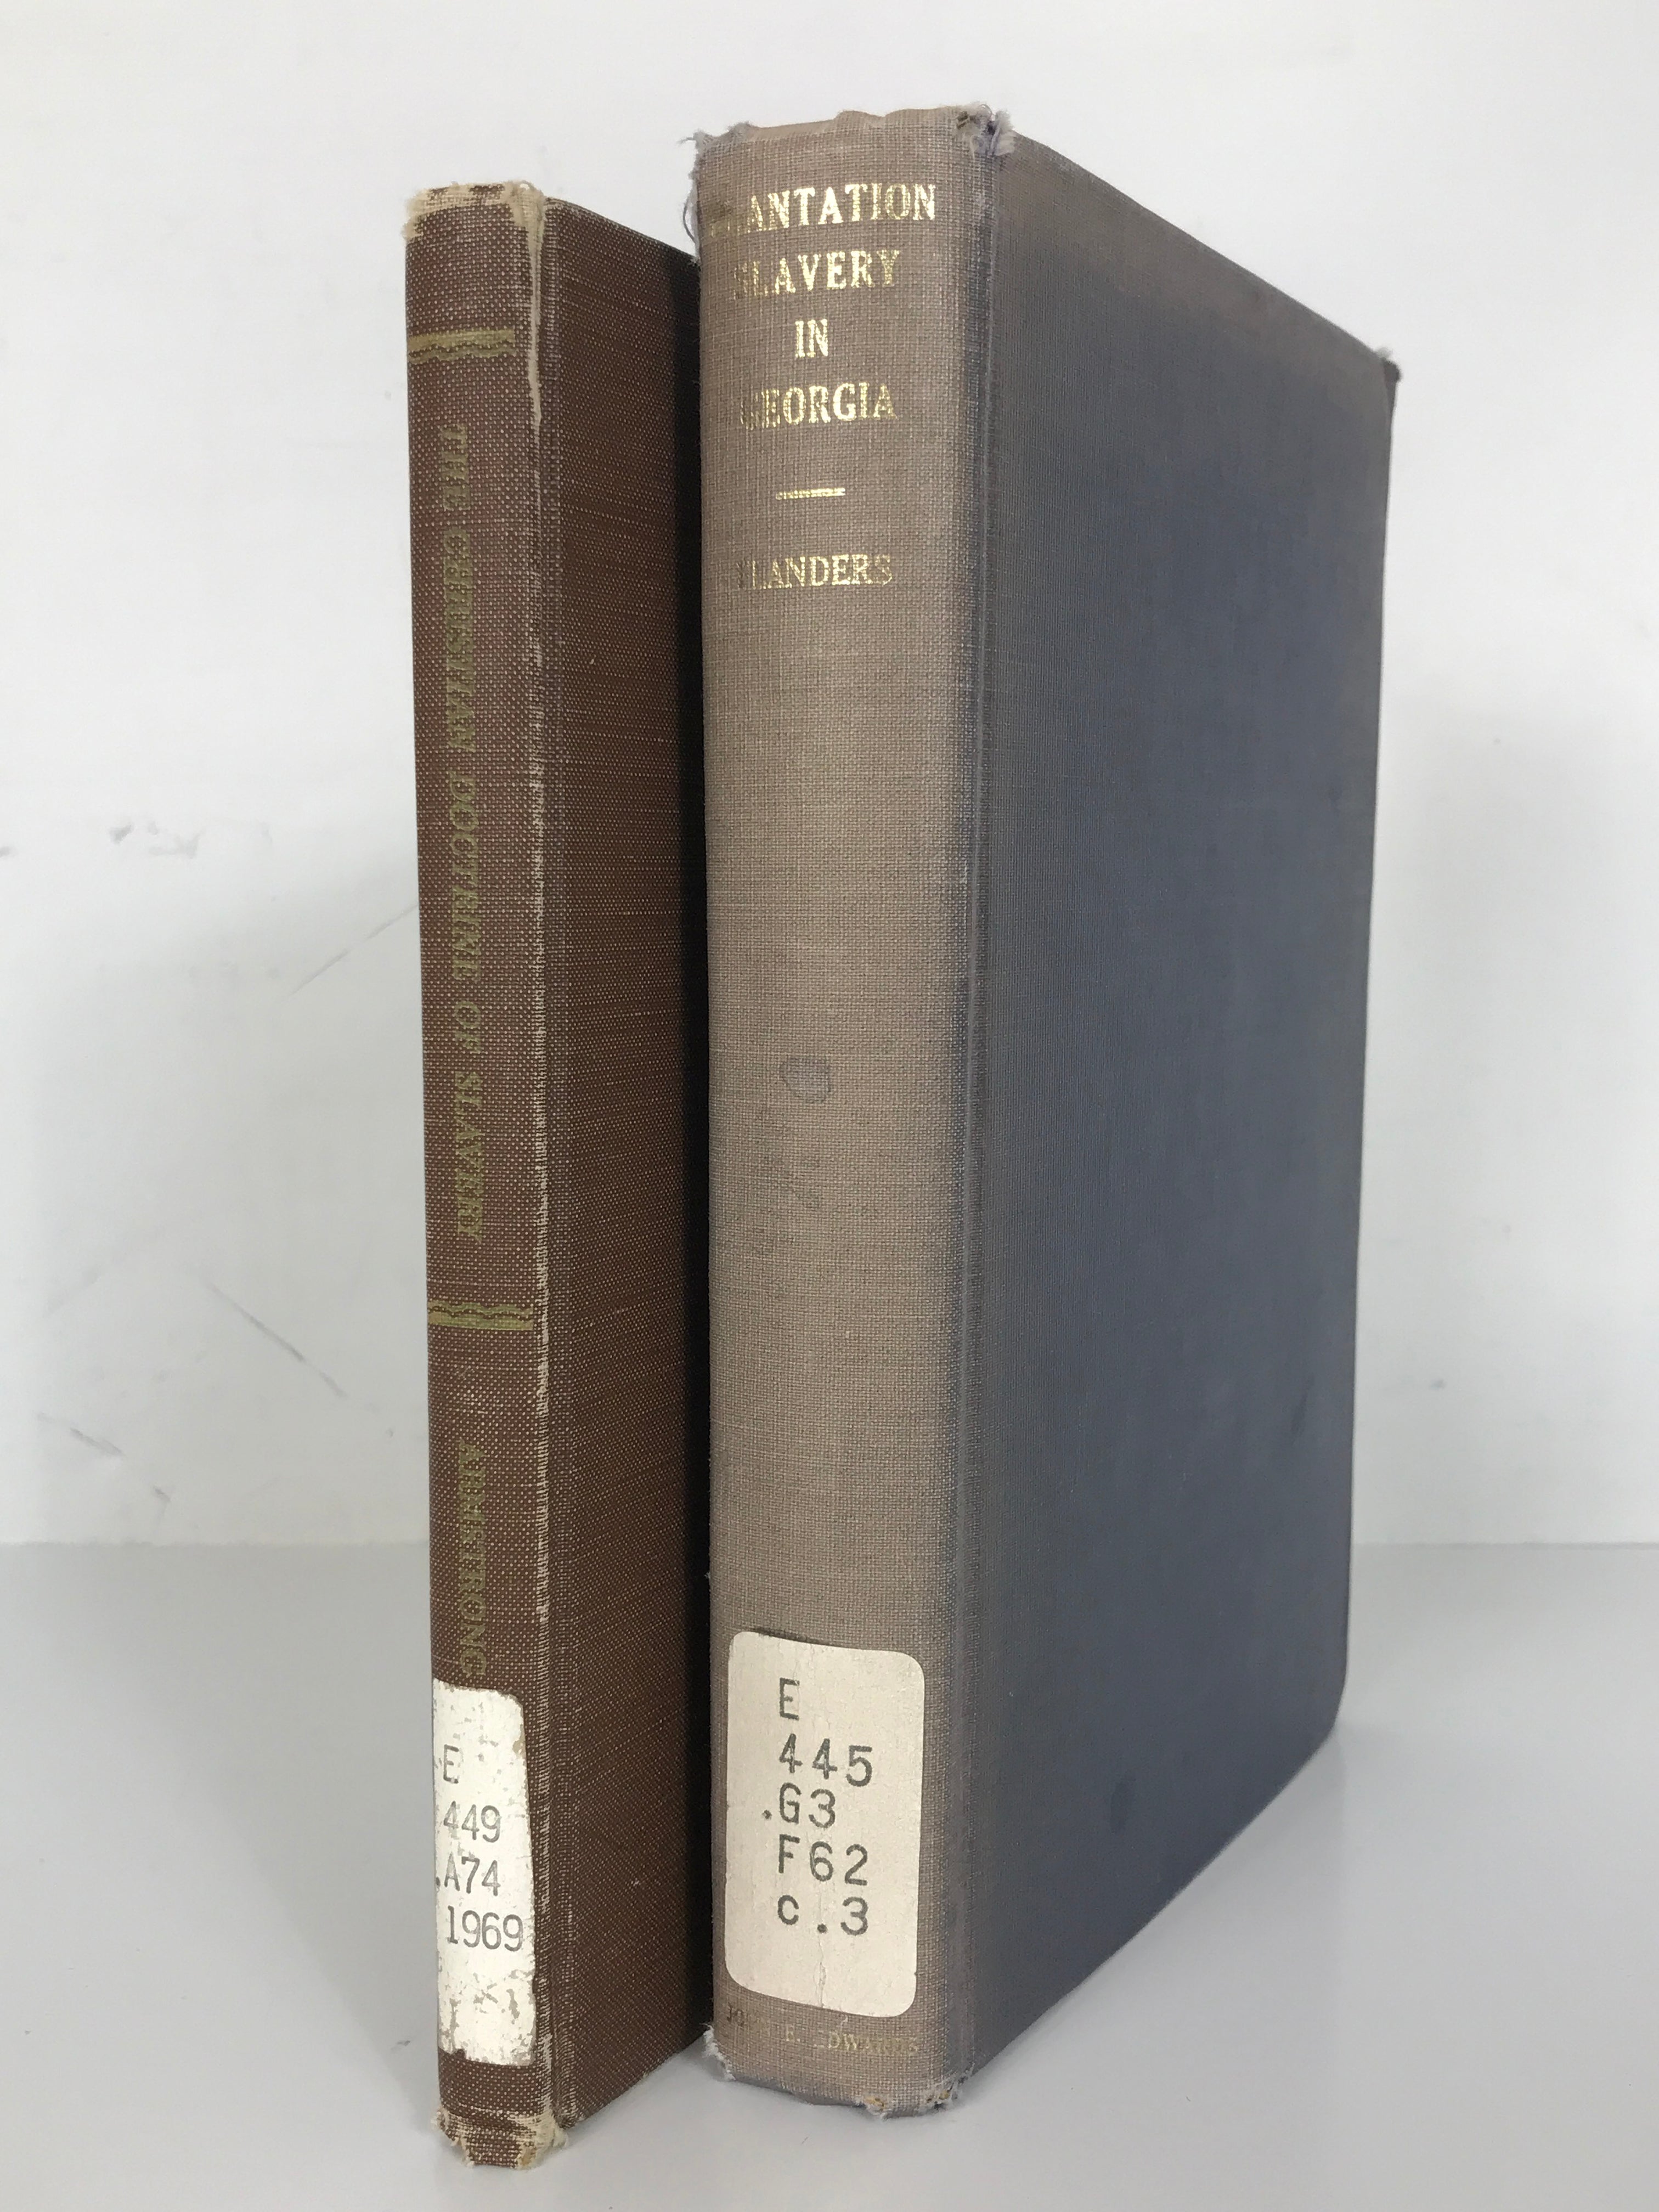 Lot of 2 Rare History Books: Plantation Slavery in Georgia (1967) and The Christian Doctrine of Slavery (1969) HC Former Library Copies